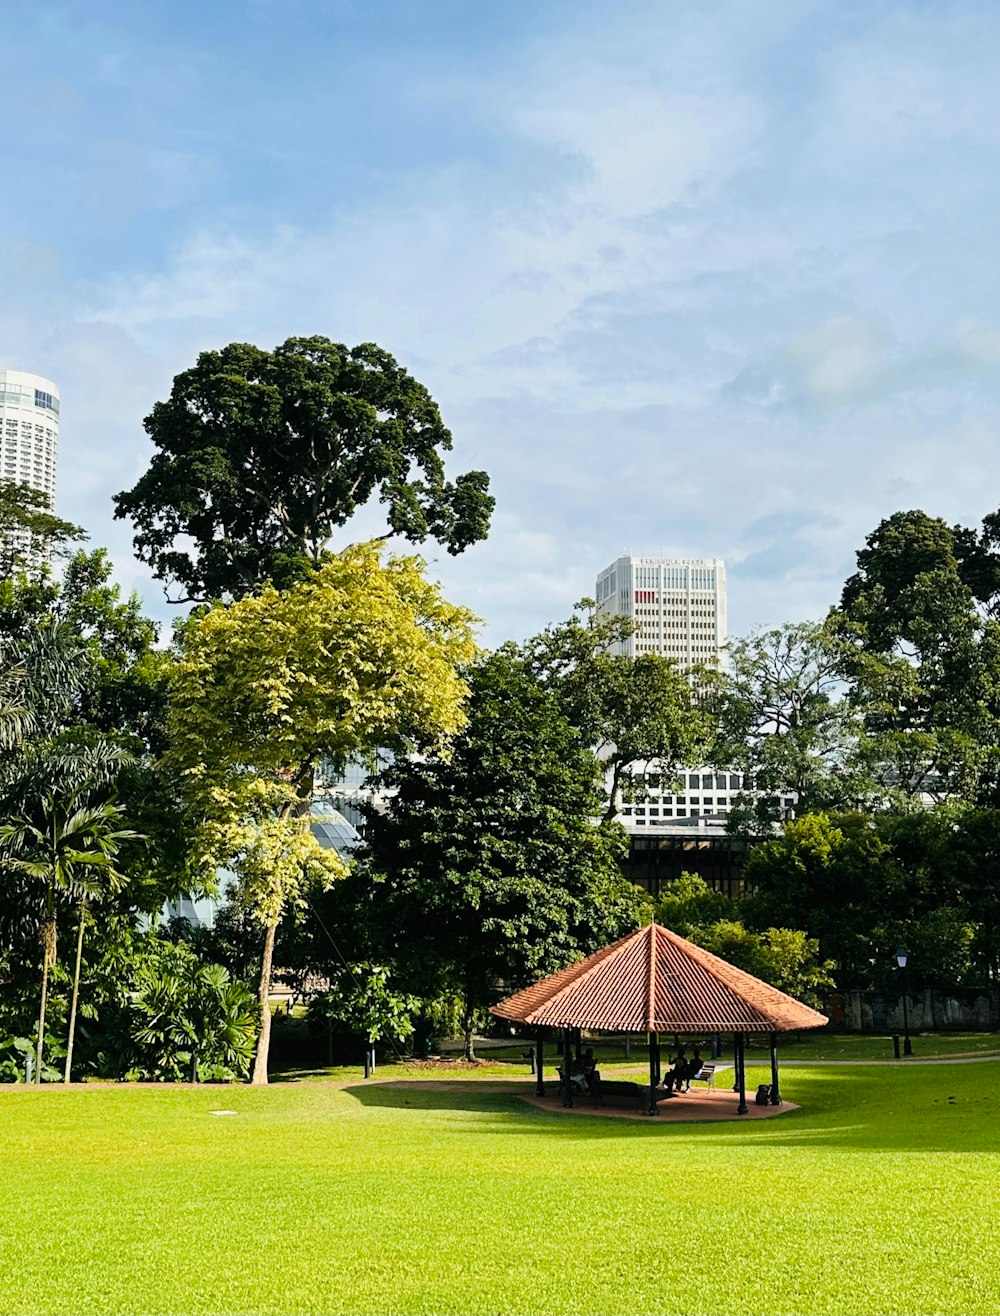 a gazebo in the middle of a park with tall buildings in the background